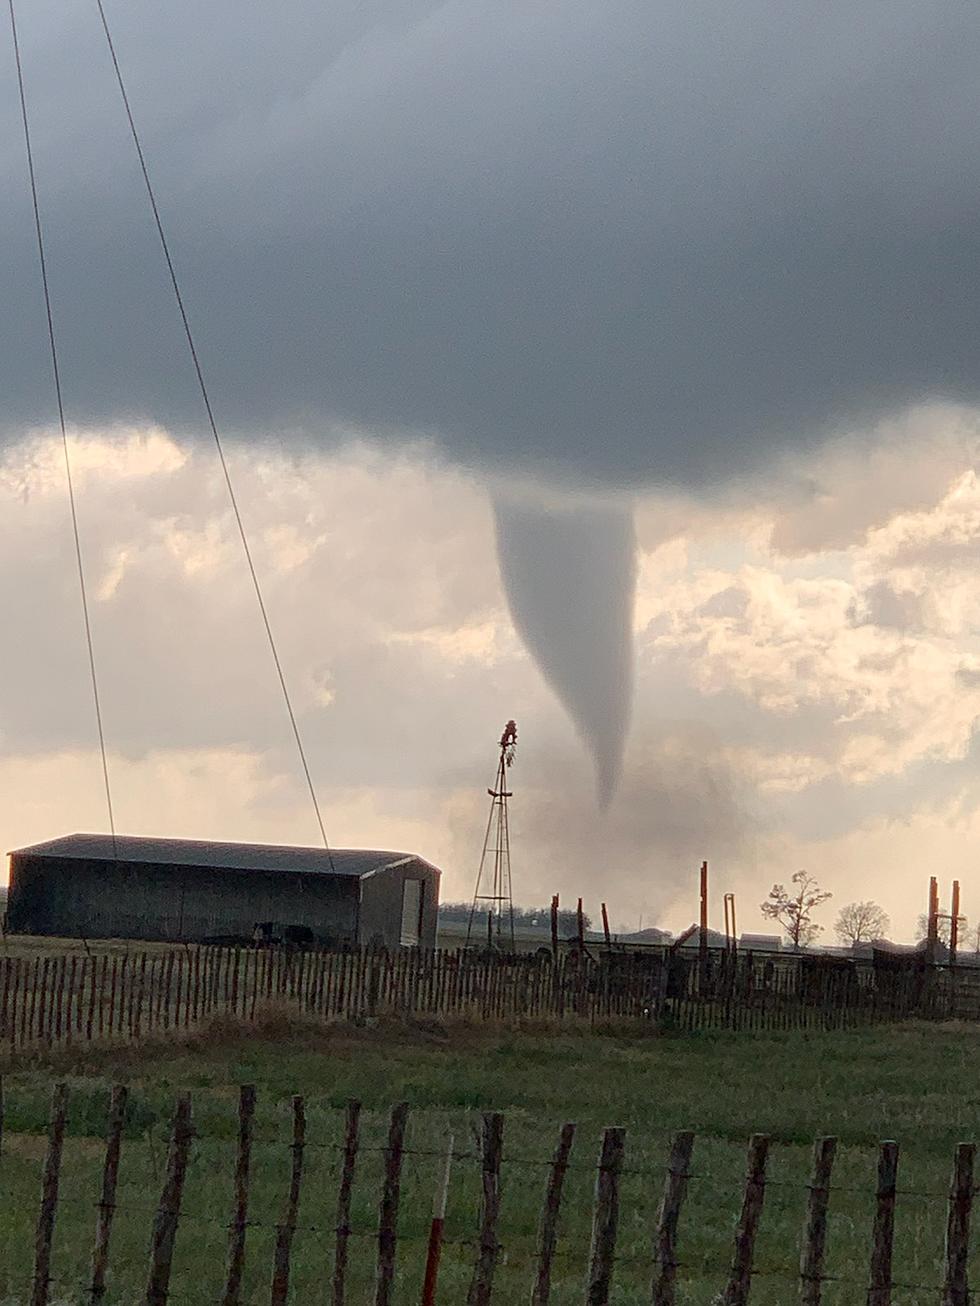 See Some Incredible Photos from Last Friday’s Tornado Near Vernon